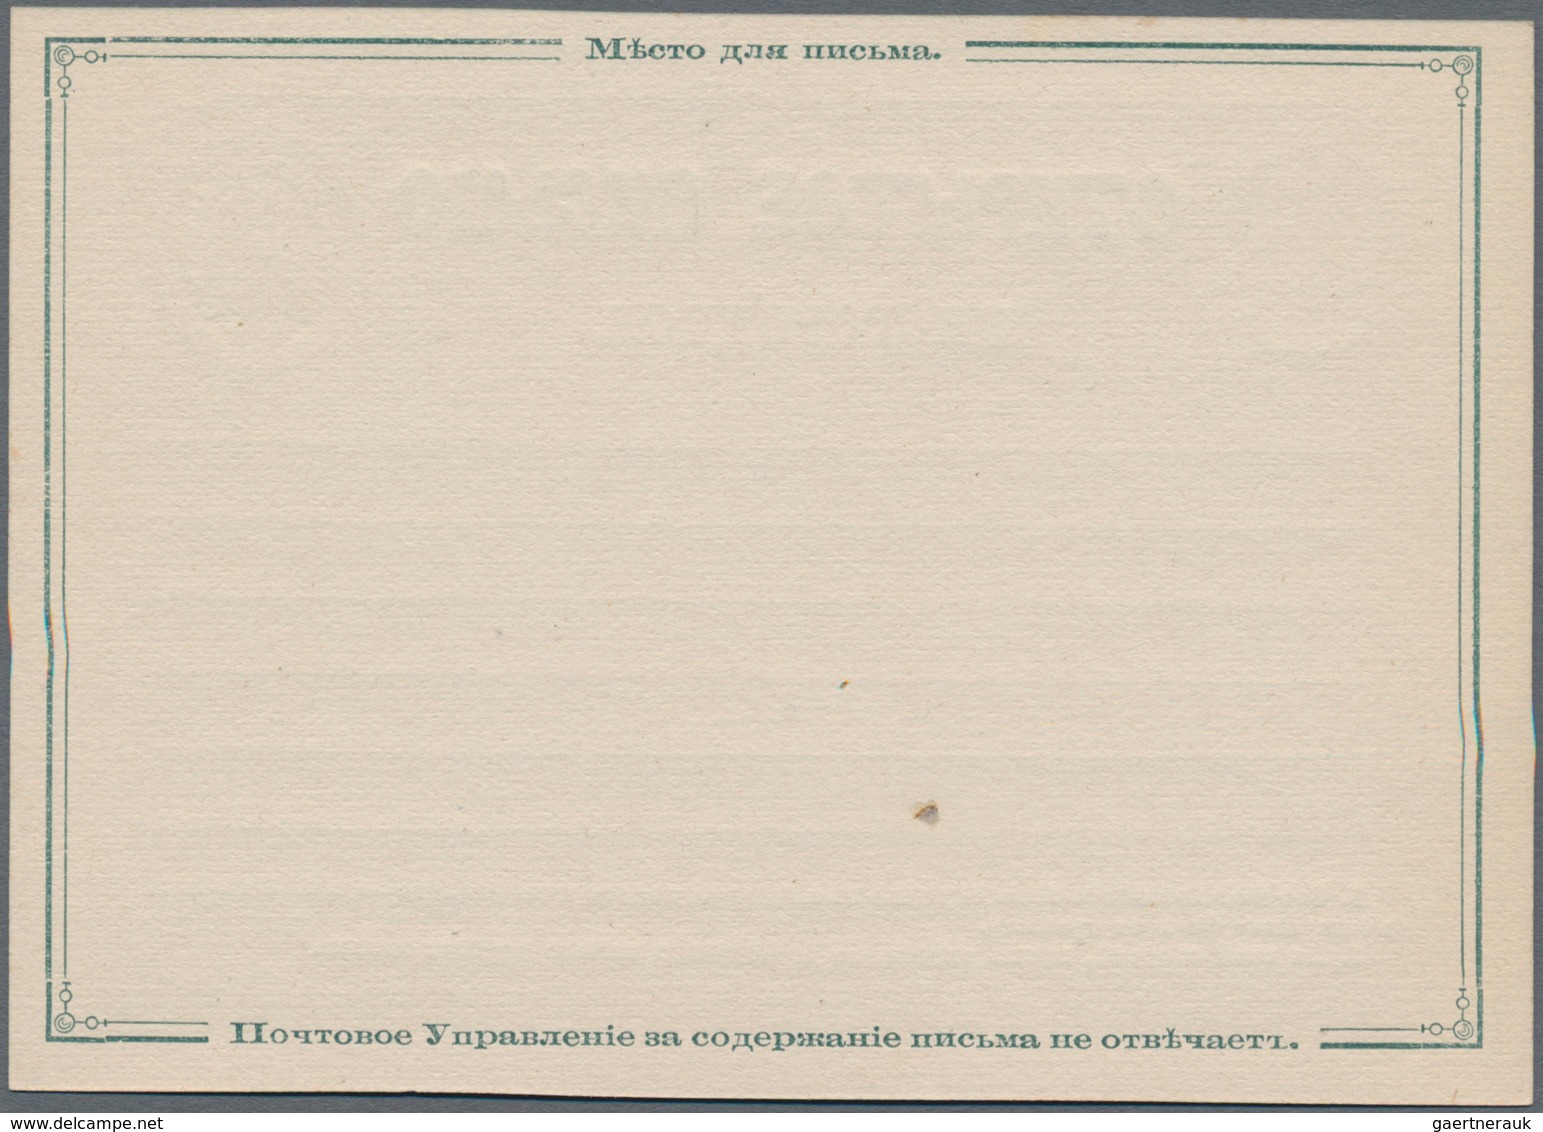 Russland - Ganzsachen: 1875 Unused Postal Stationery Card 4 Kop. Green On White, Variant With Clear - Stamped Stationery